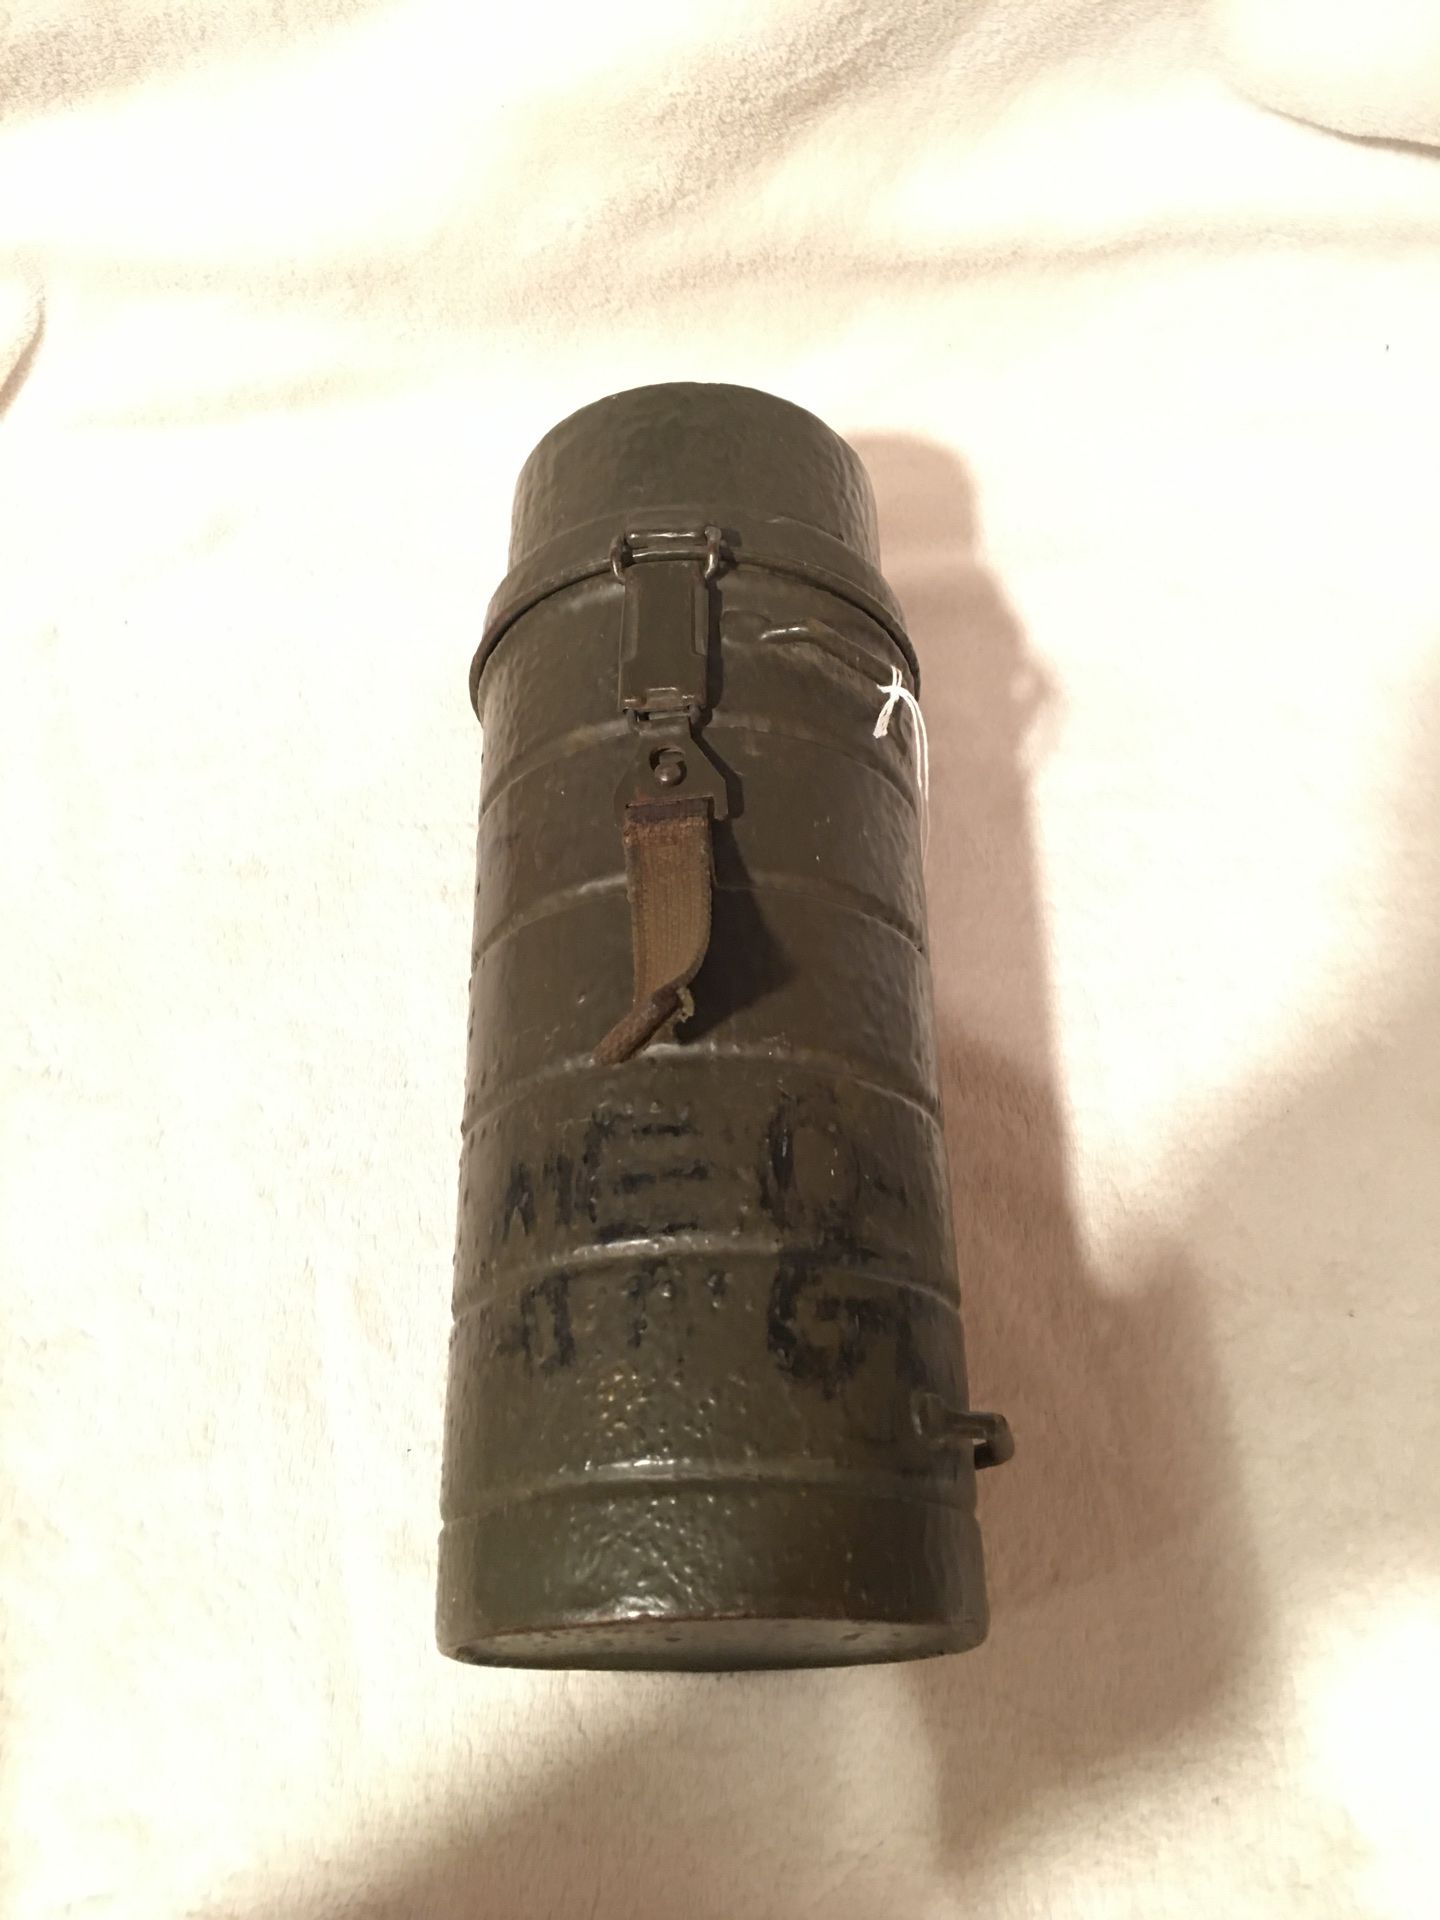 1960s West Germany gas mask canister